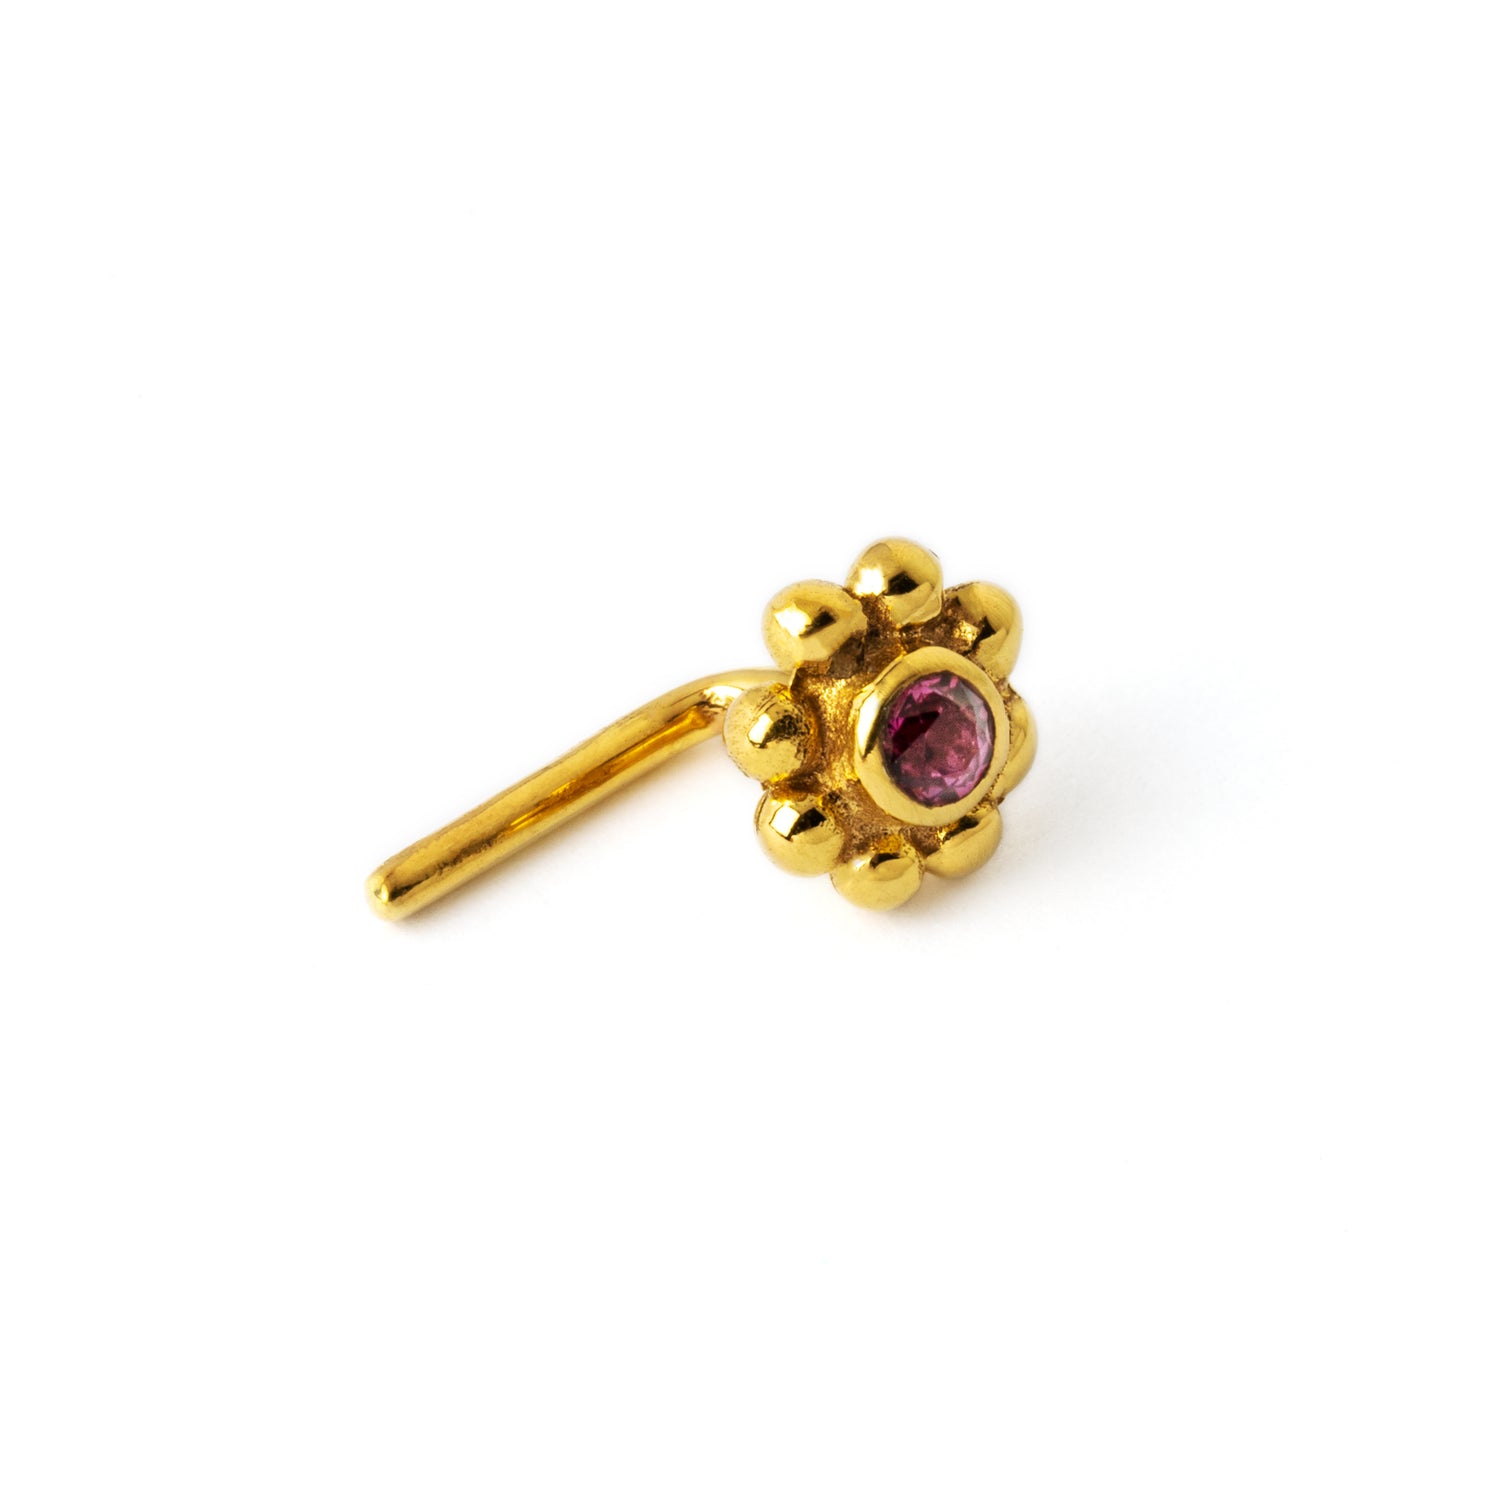 Gold Flower Nose Stud with Garnet right side view